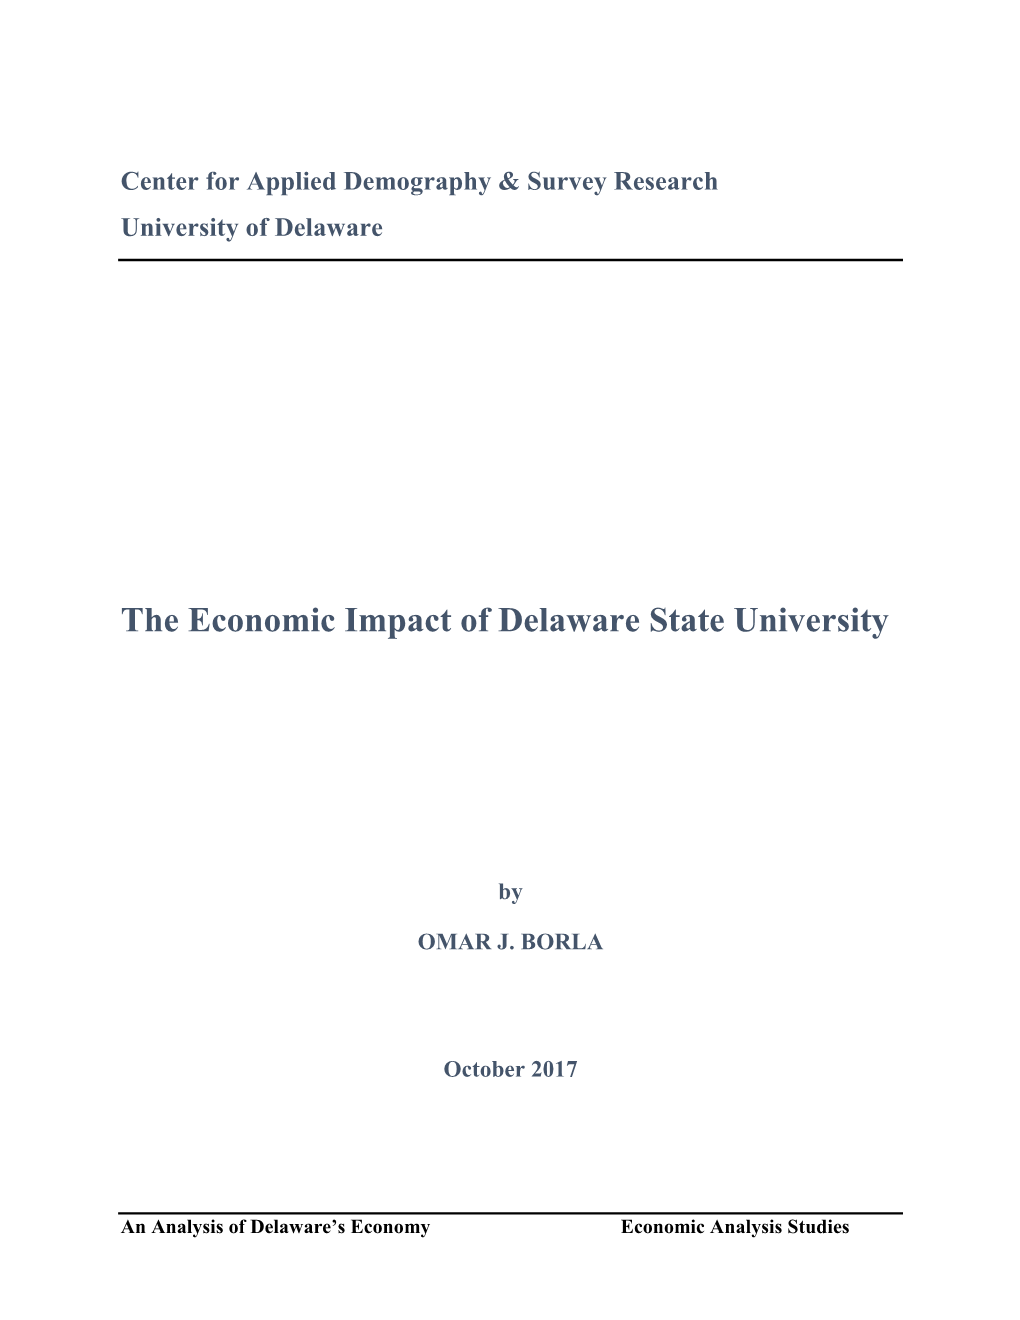 The Economic Impact of the Delaware State University